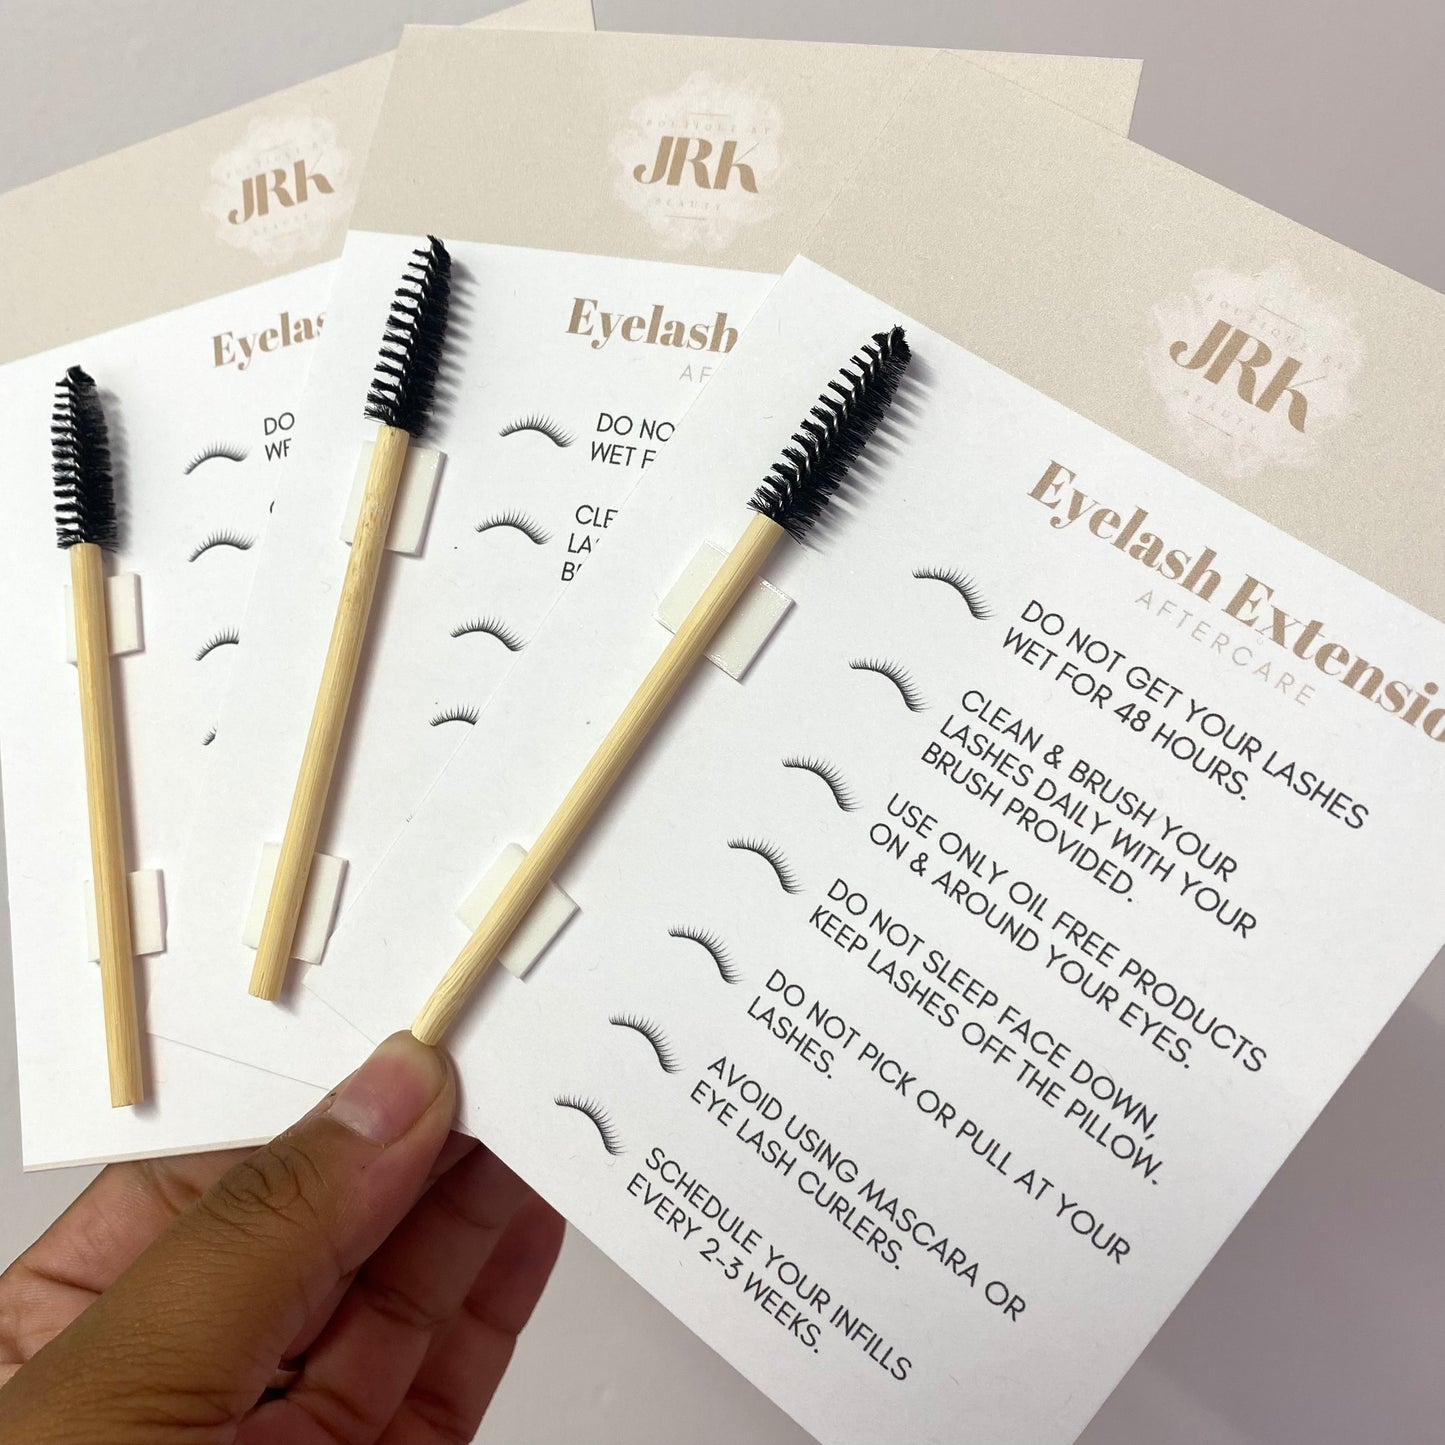 EYELASH Aftercare cards with spoolies/lash brush